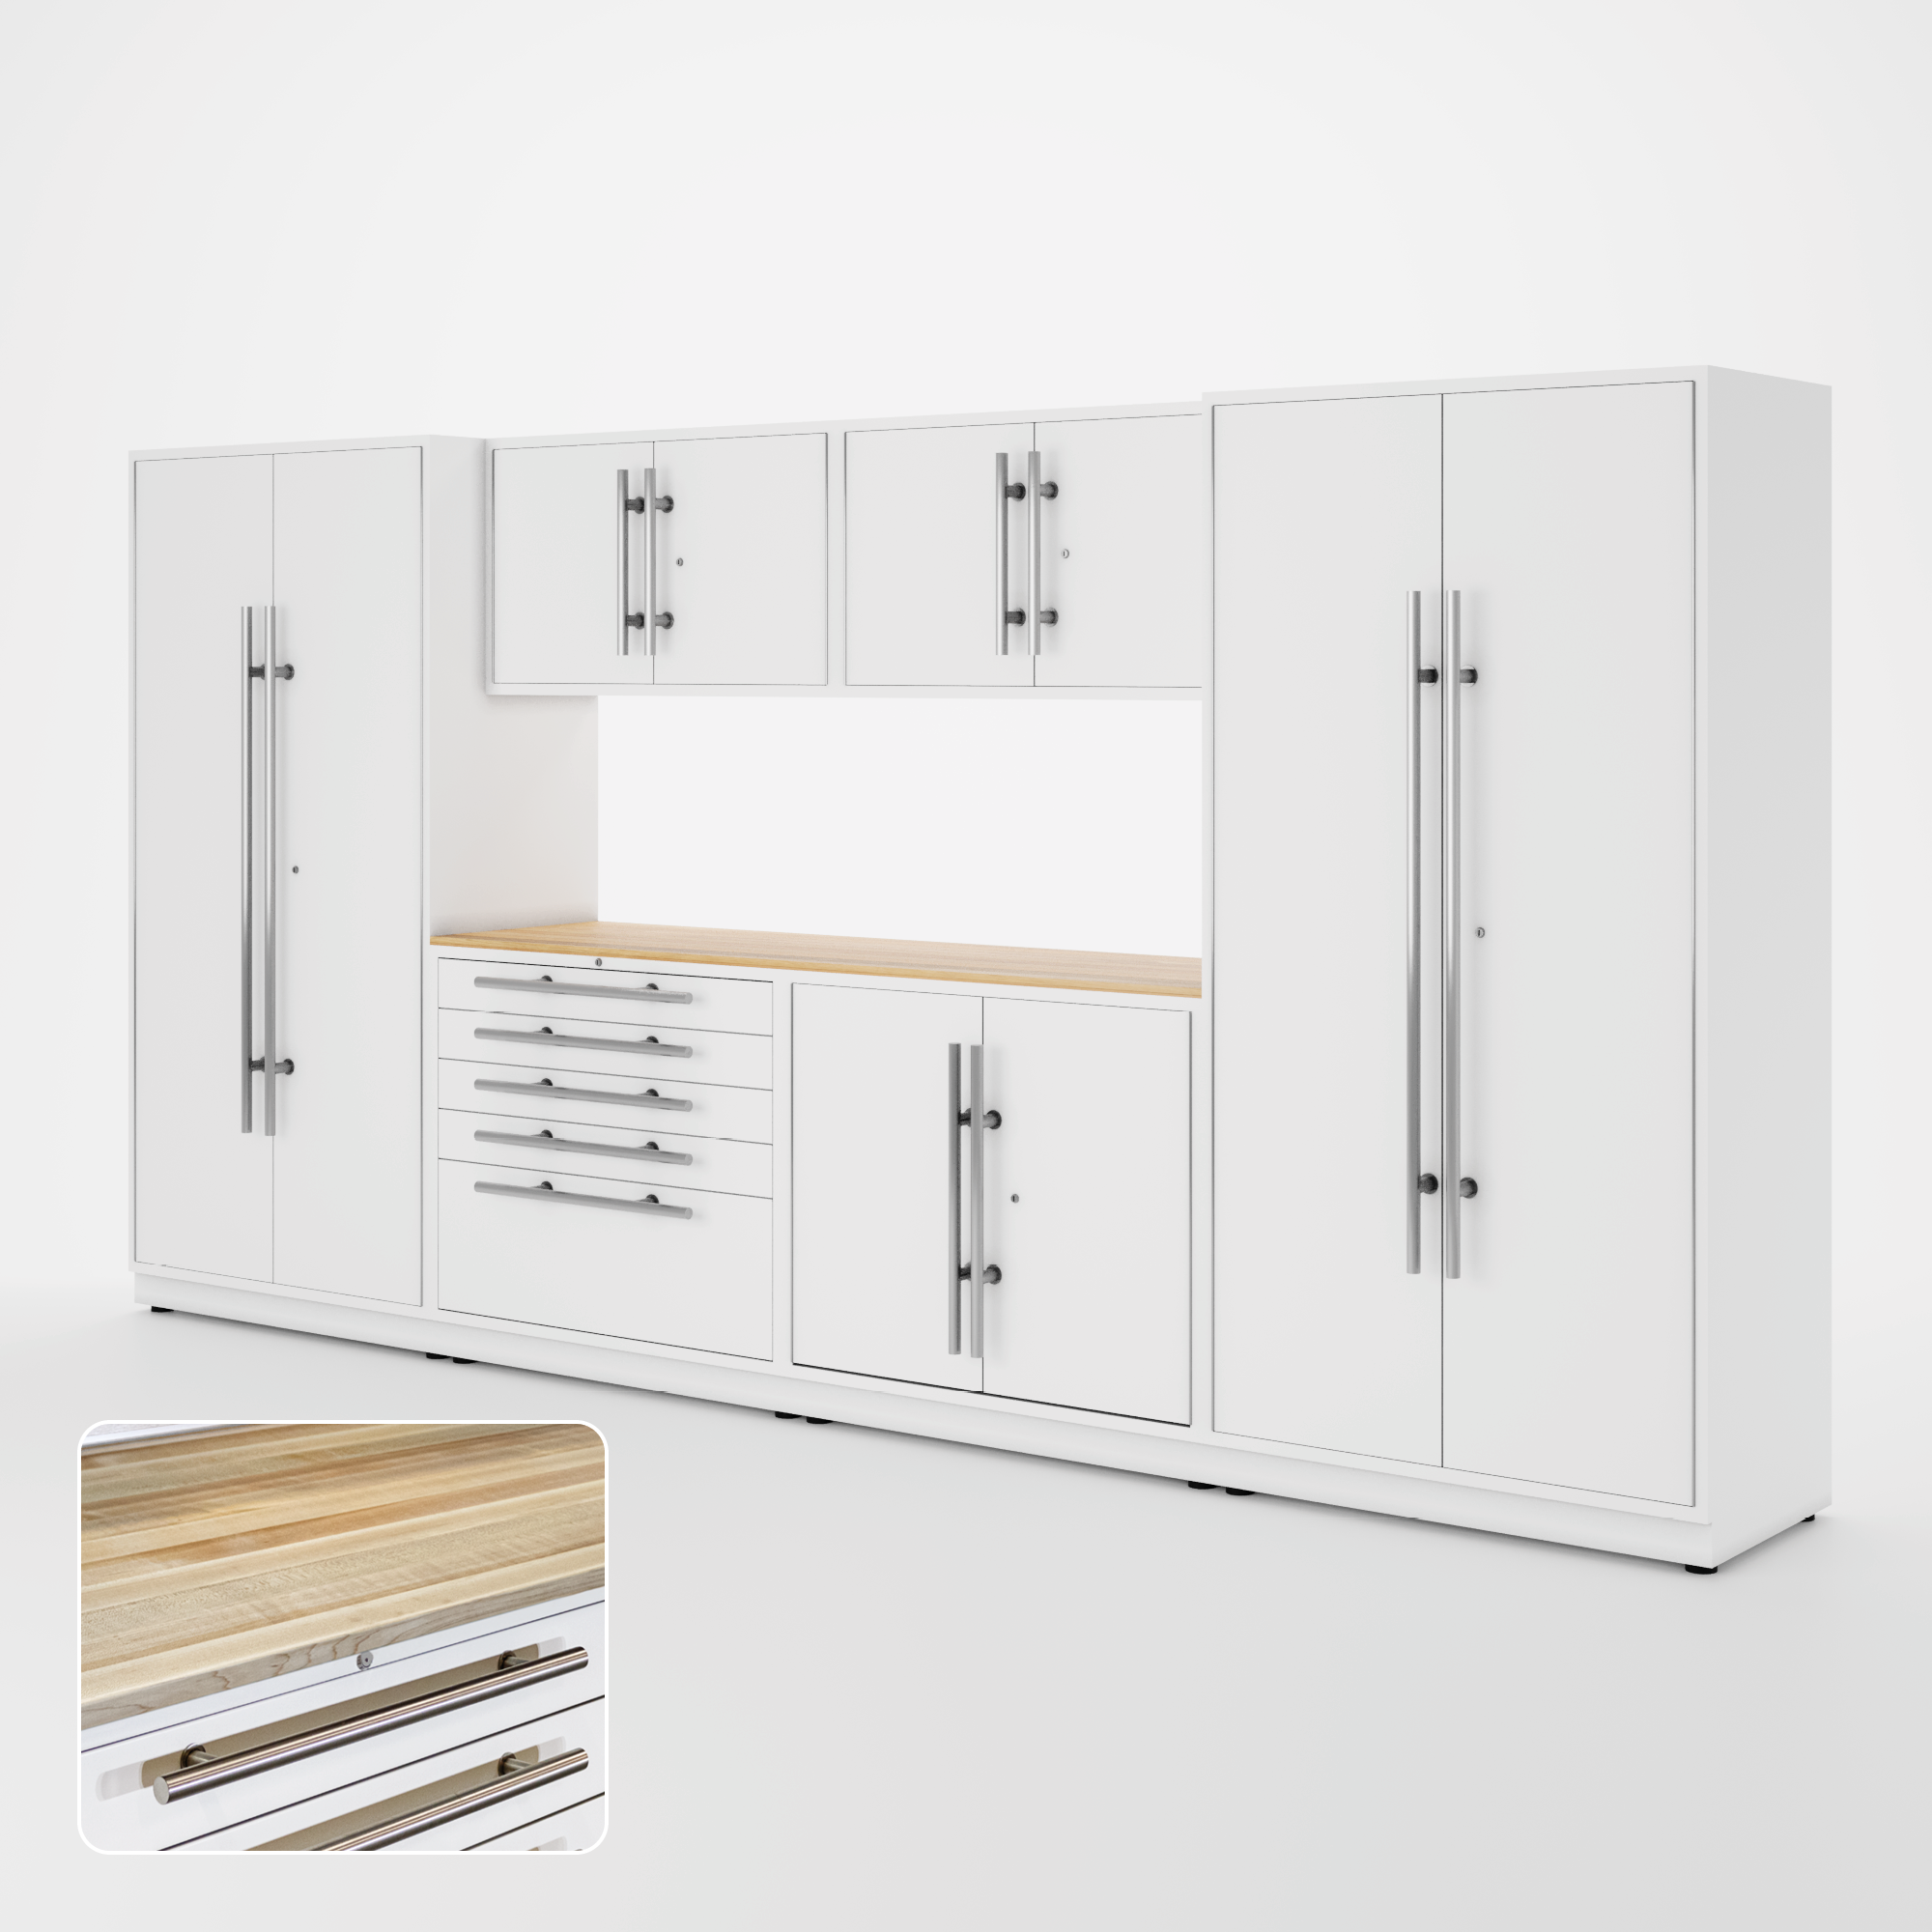 LUX Cabinets – 13 ft set – MAX